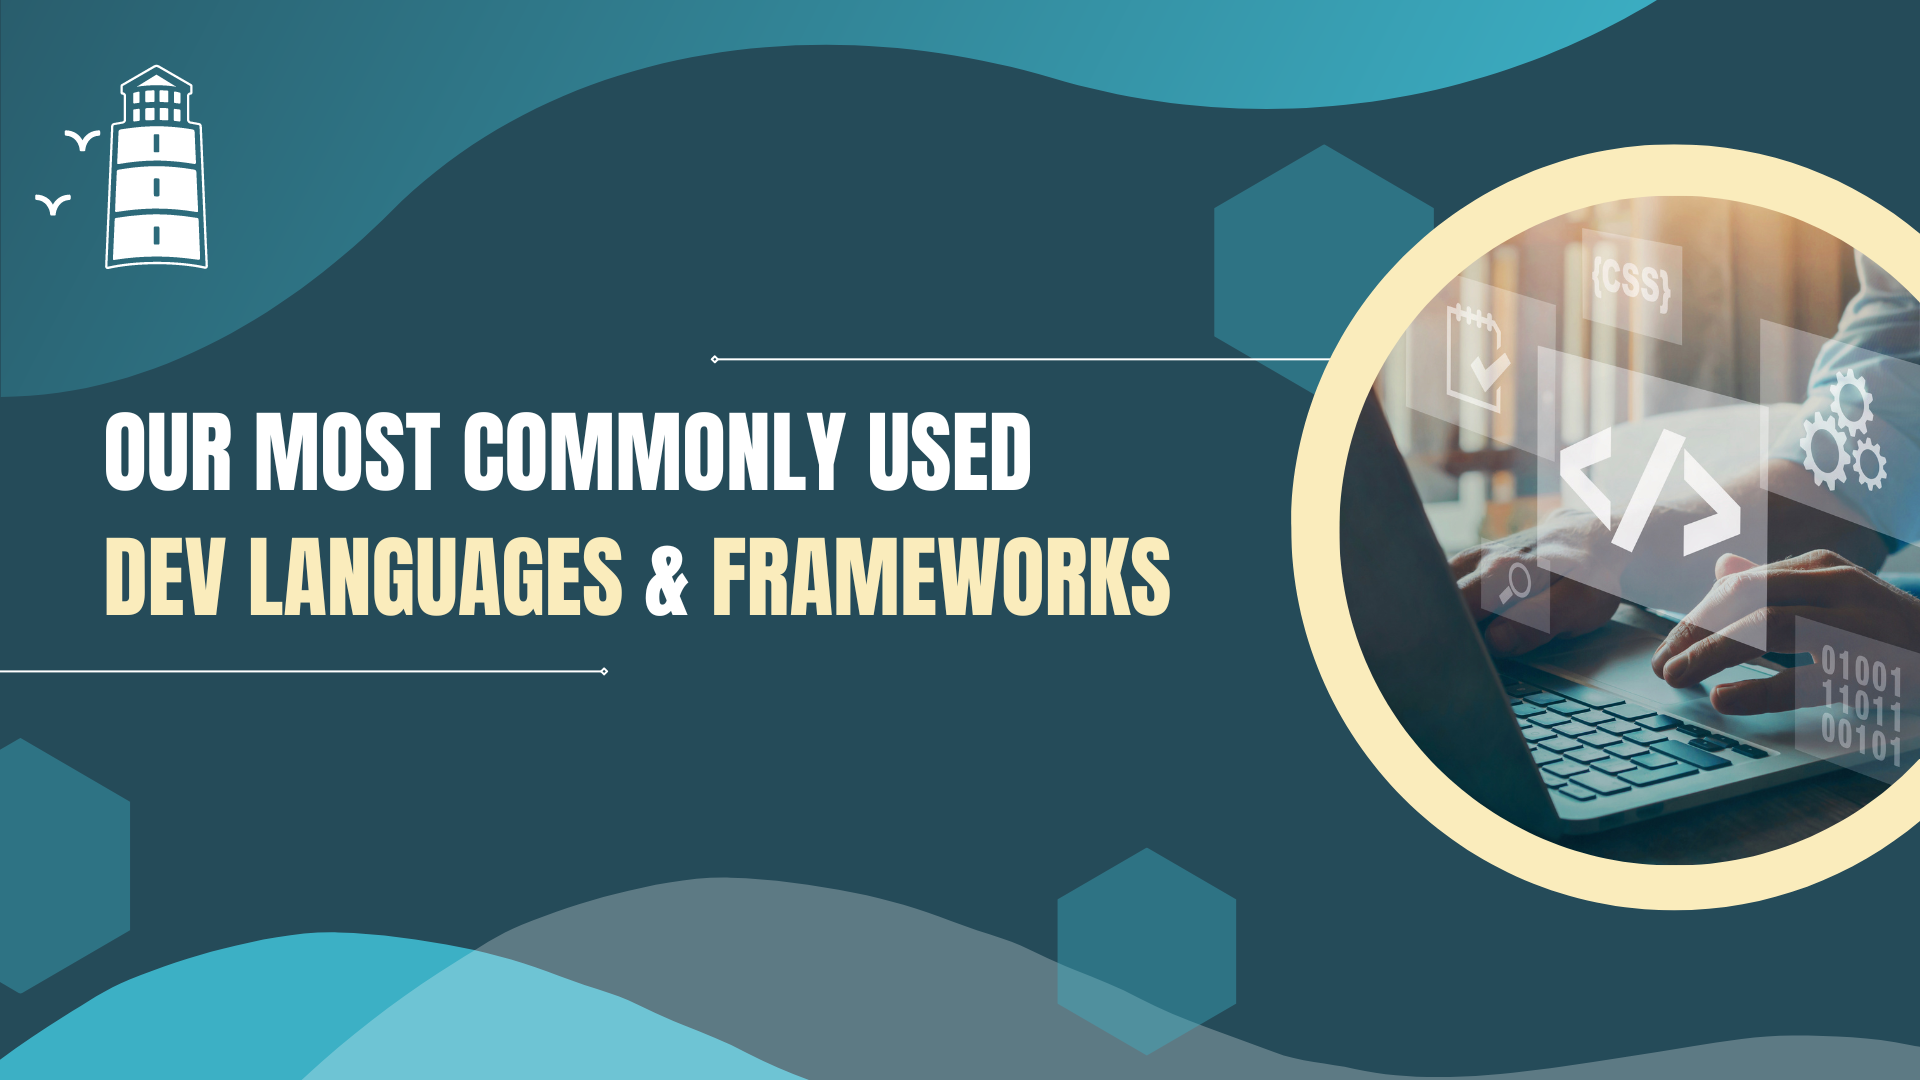 App Inlet’s Most Commonly Used Development Languages & Frameworks